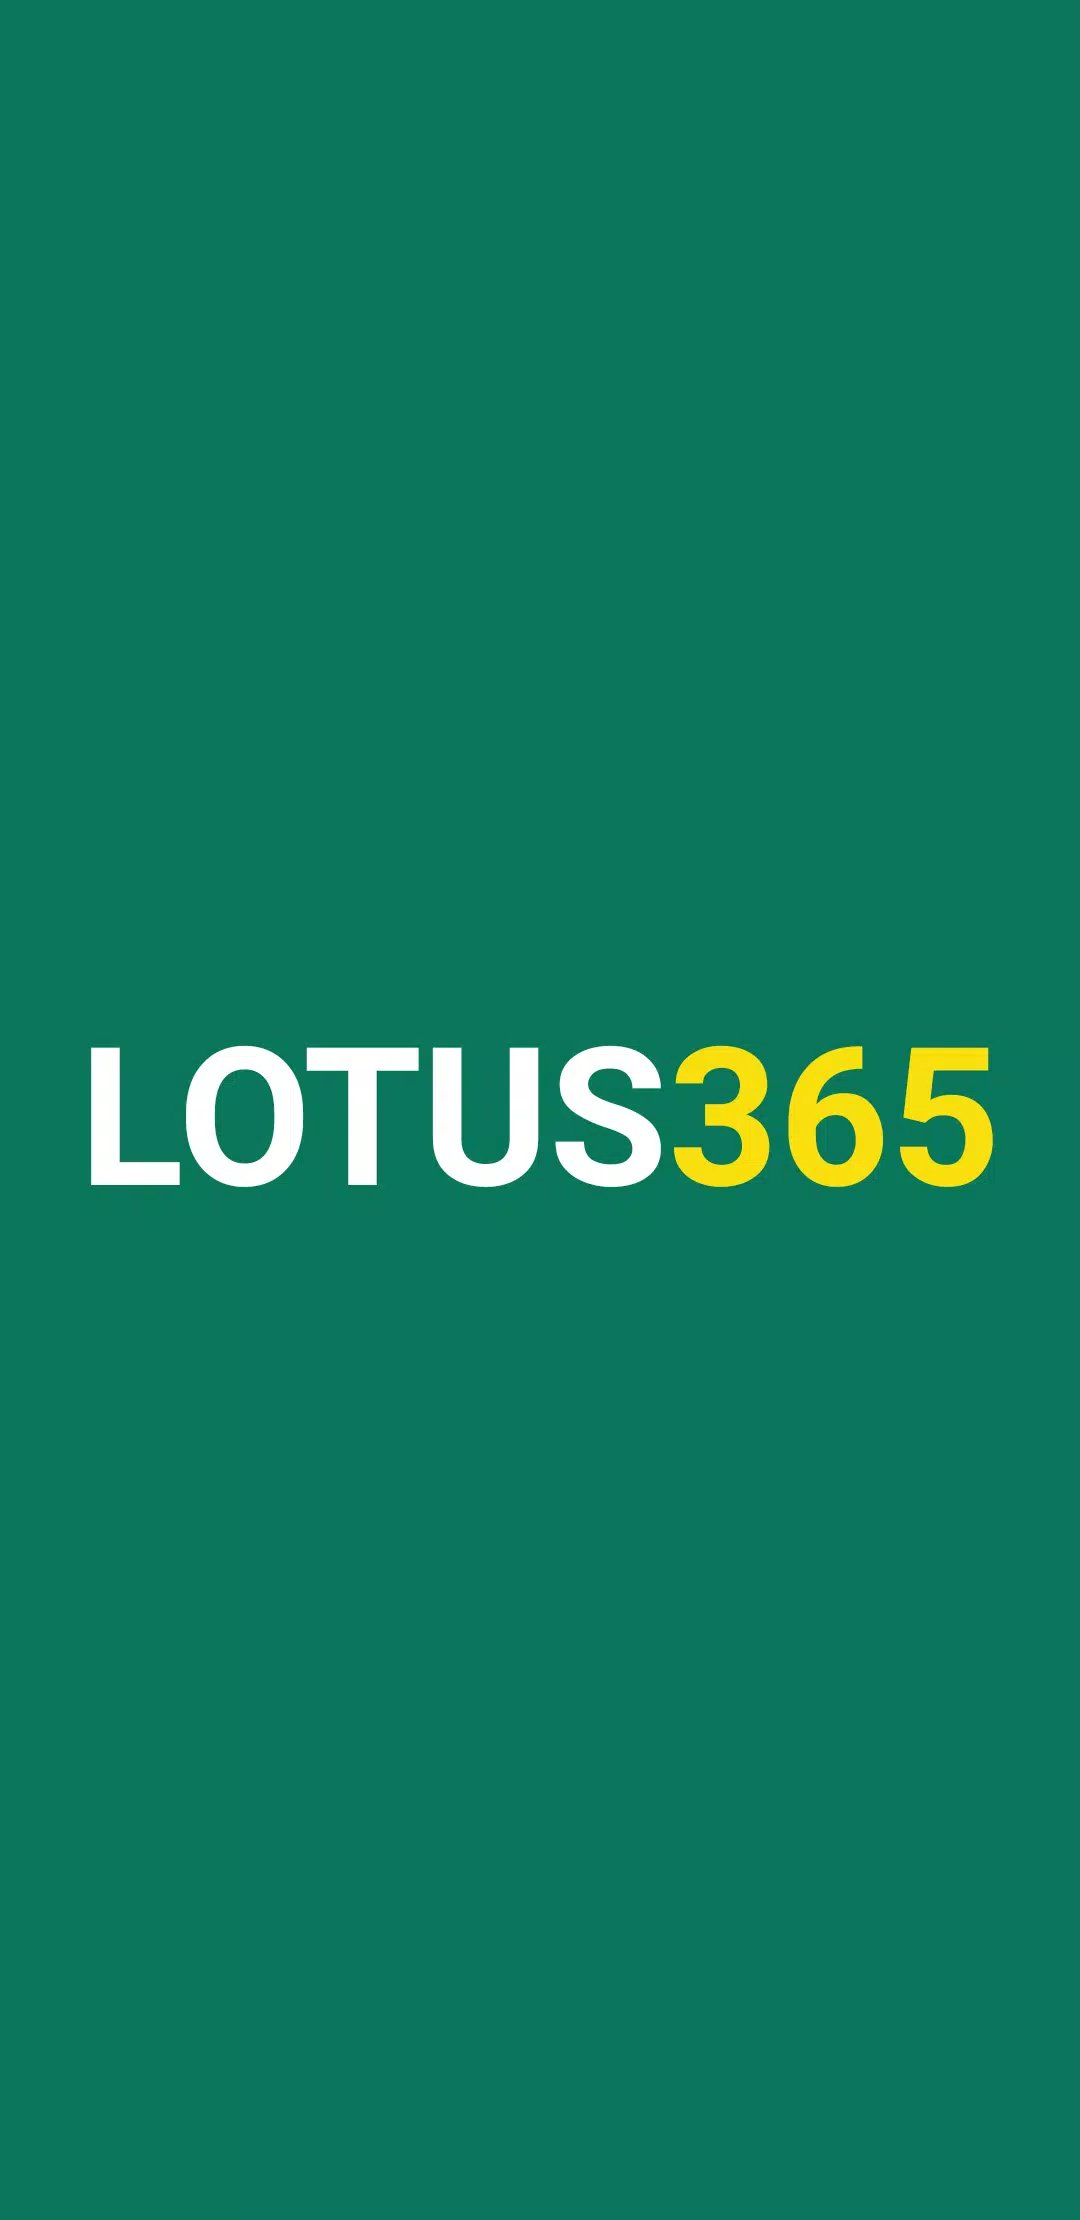 Download Www.Lotus365 Apk: Get The Latest Version For Free